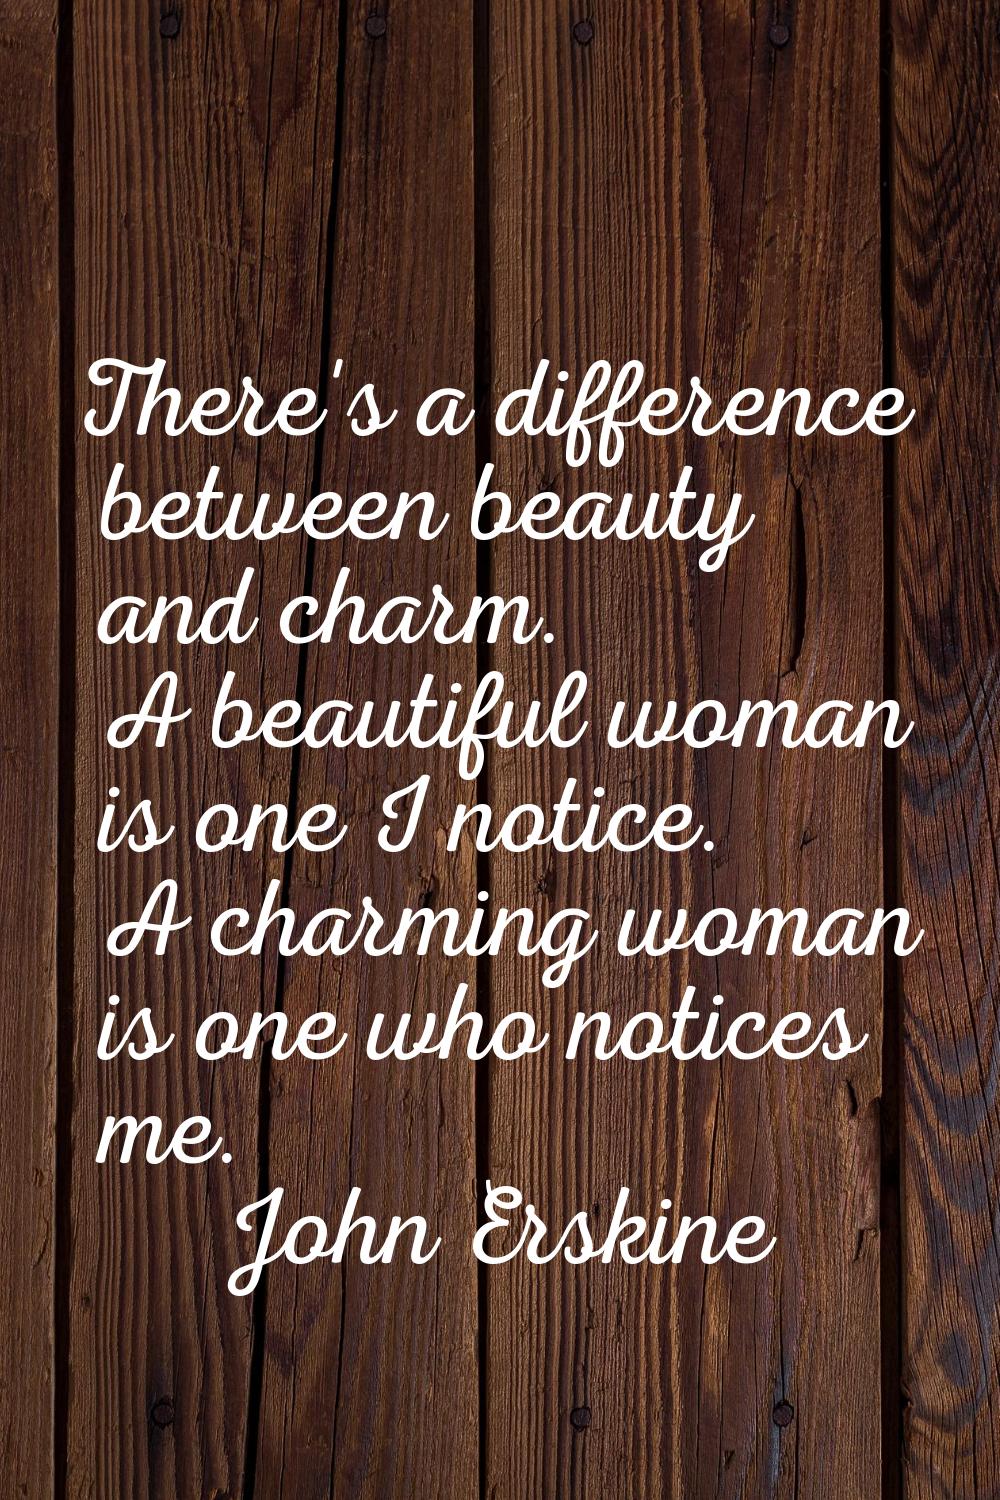 There's a difference between beauty and charm. A beautiful woman is one I notice. A charming woman 